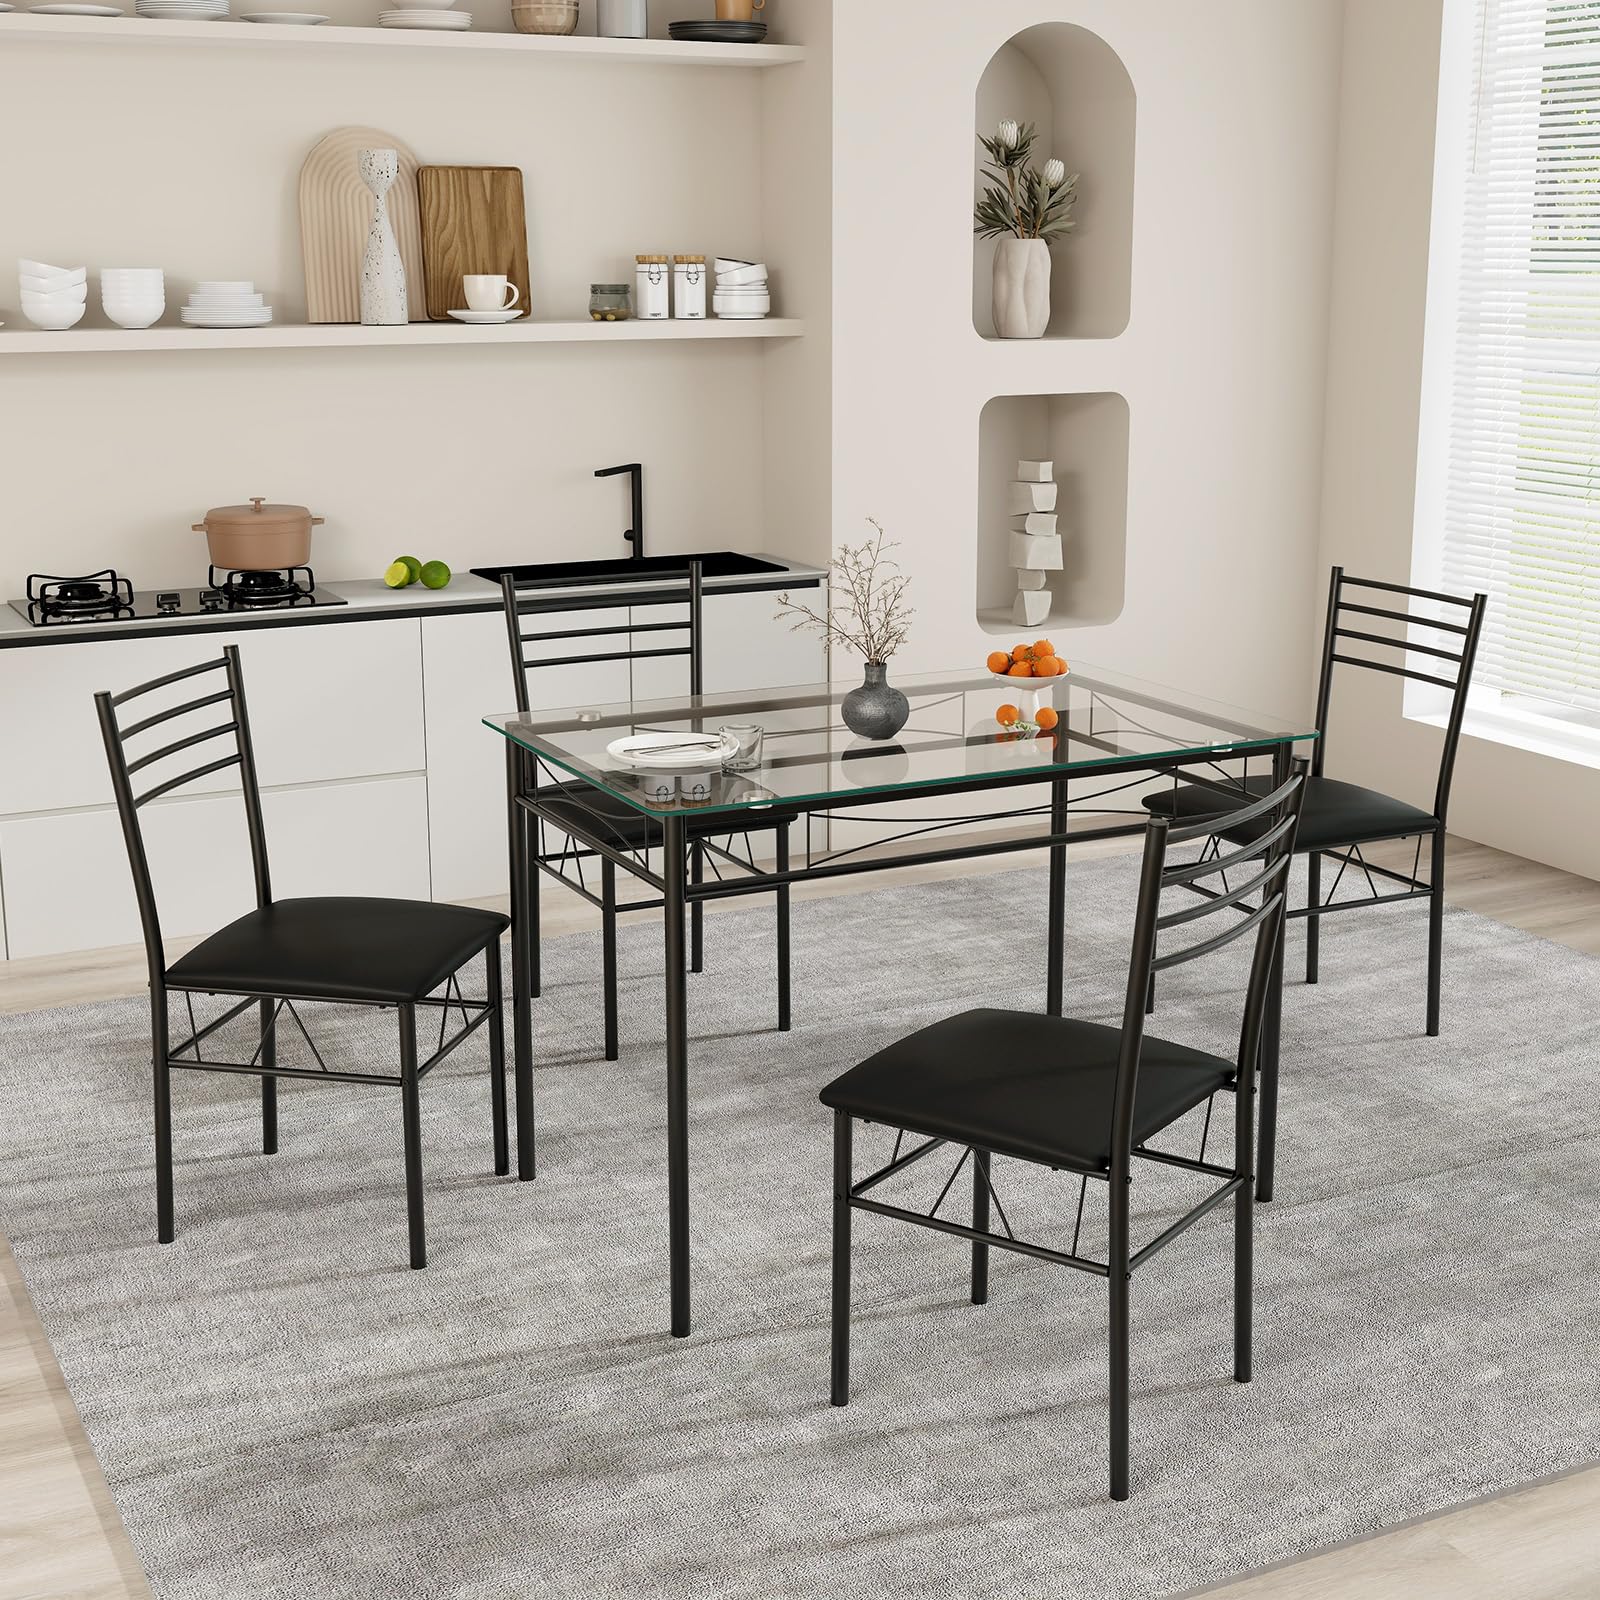 NAFORT 5-Piece Dining Table Set for 4, Modern 3/8’’ Tempered Glass Kitchen Room Table with 4 Upholstered Dining Chairs, Space-Saving Dinette Tables with Metal Frame for Apartment, Office